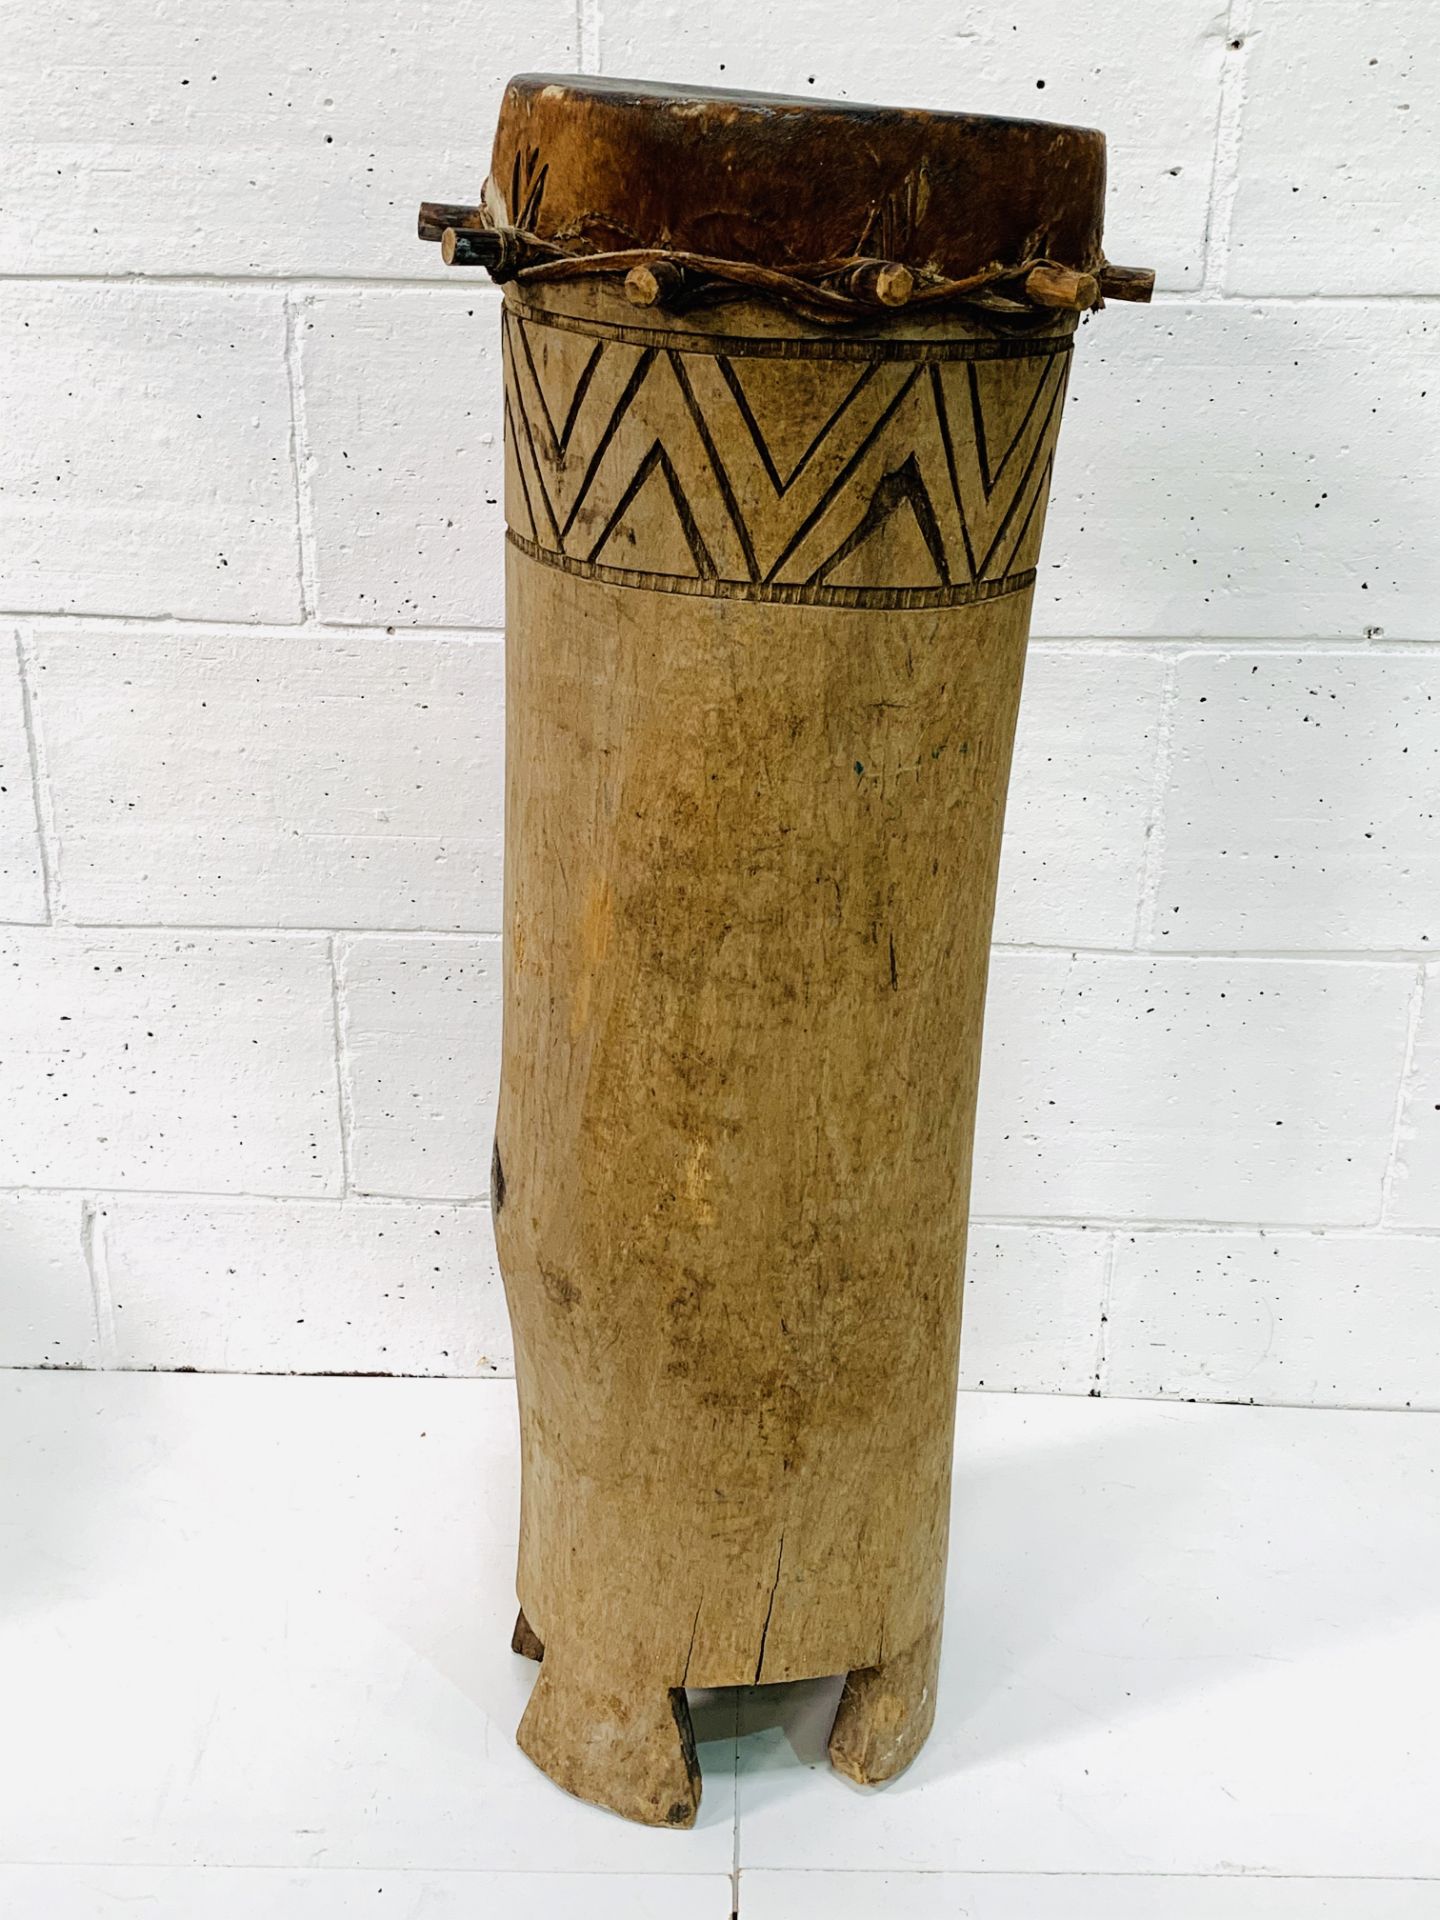 Large African drum carved from a tree trunk.